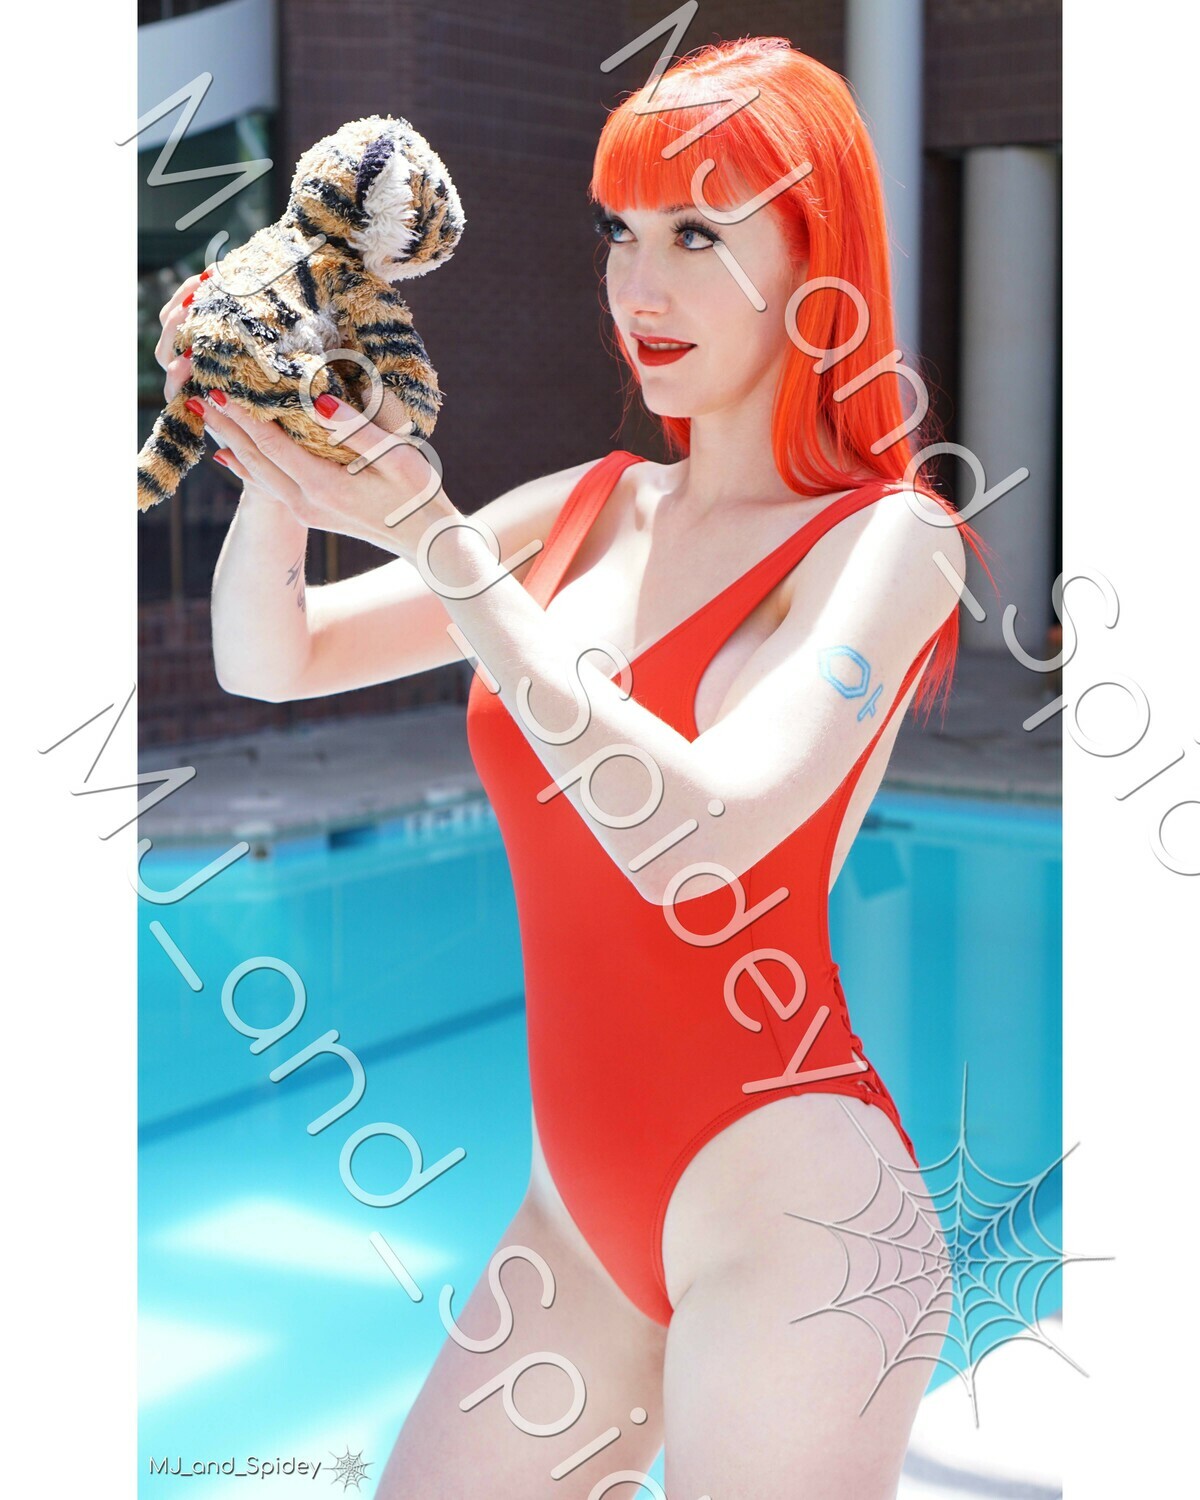 Marvel - Spider-Man - Mary Jane Watson - Swimsuit 3 -  Cosplay Print (@MJ_and_Spidey, MJ and Spidey, Comics)